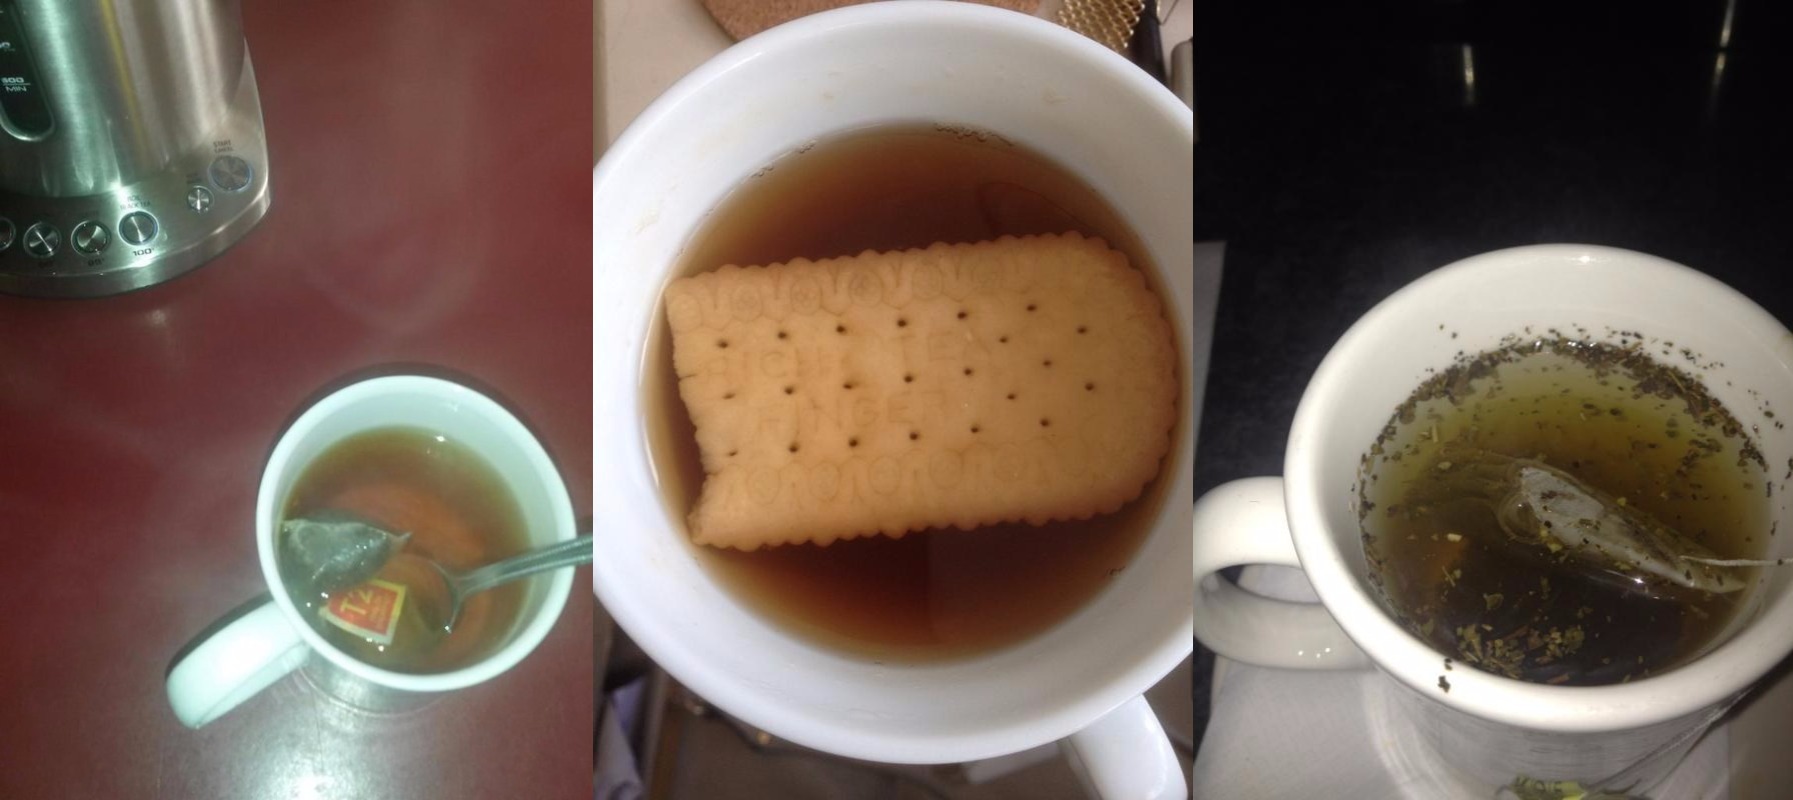 19 Pictures That Will Enrage All Tea Lovers!